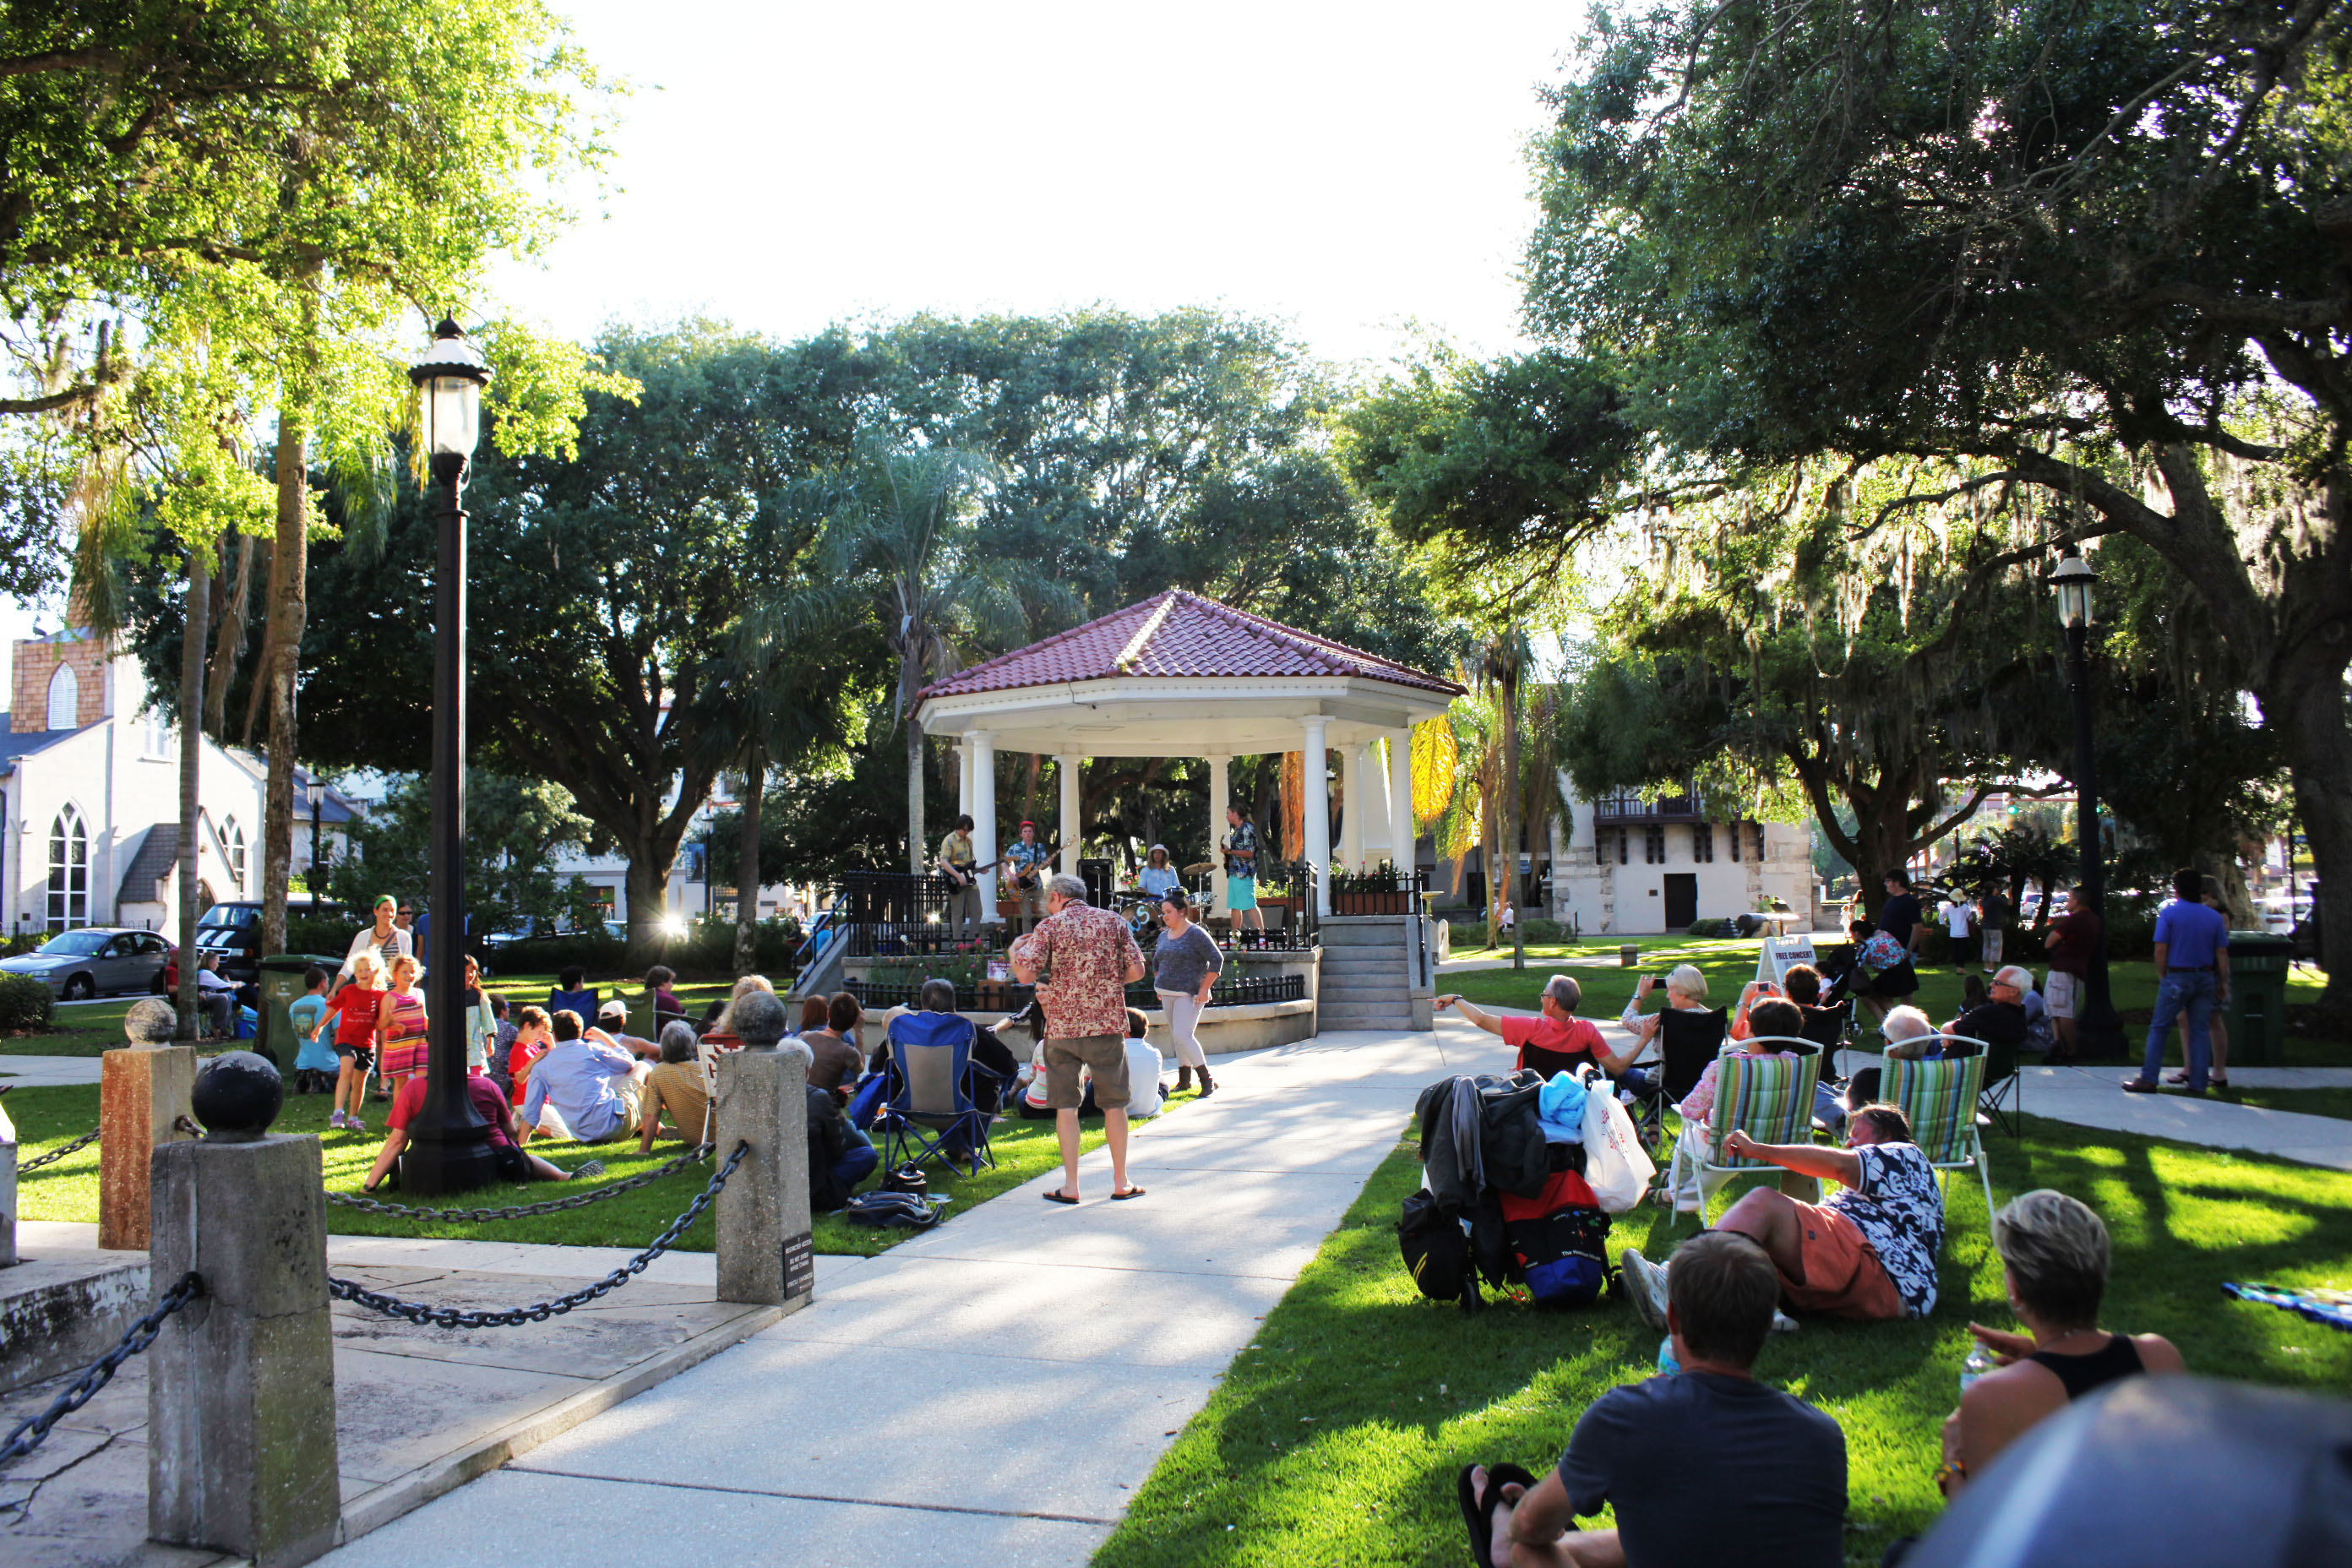 June 2Sept. 1 City of St. Augustine’s 2022 Concerts in the Plaza